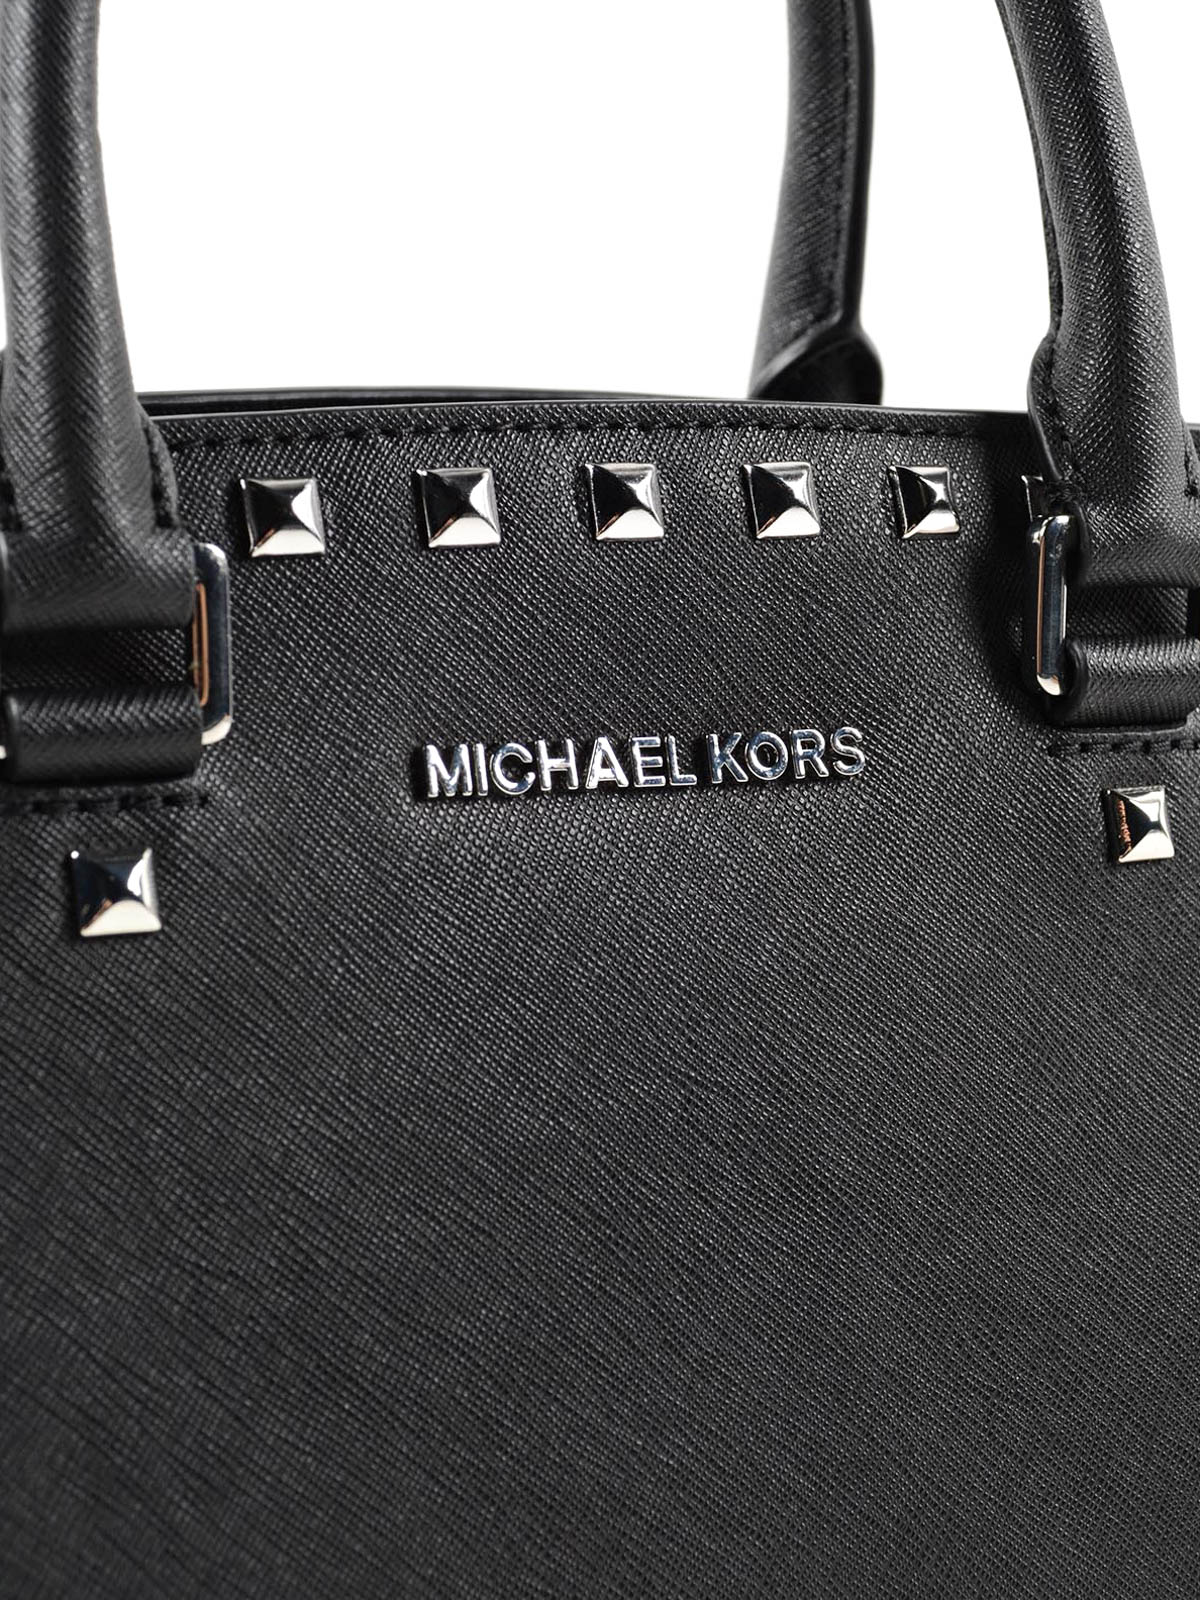 Totes bags Michael Kors - Selma studded tote - 30T3SSMMS2L001